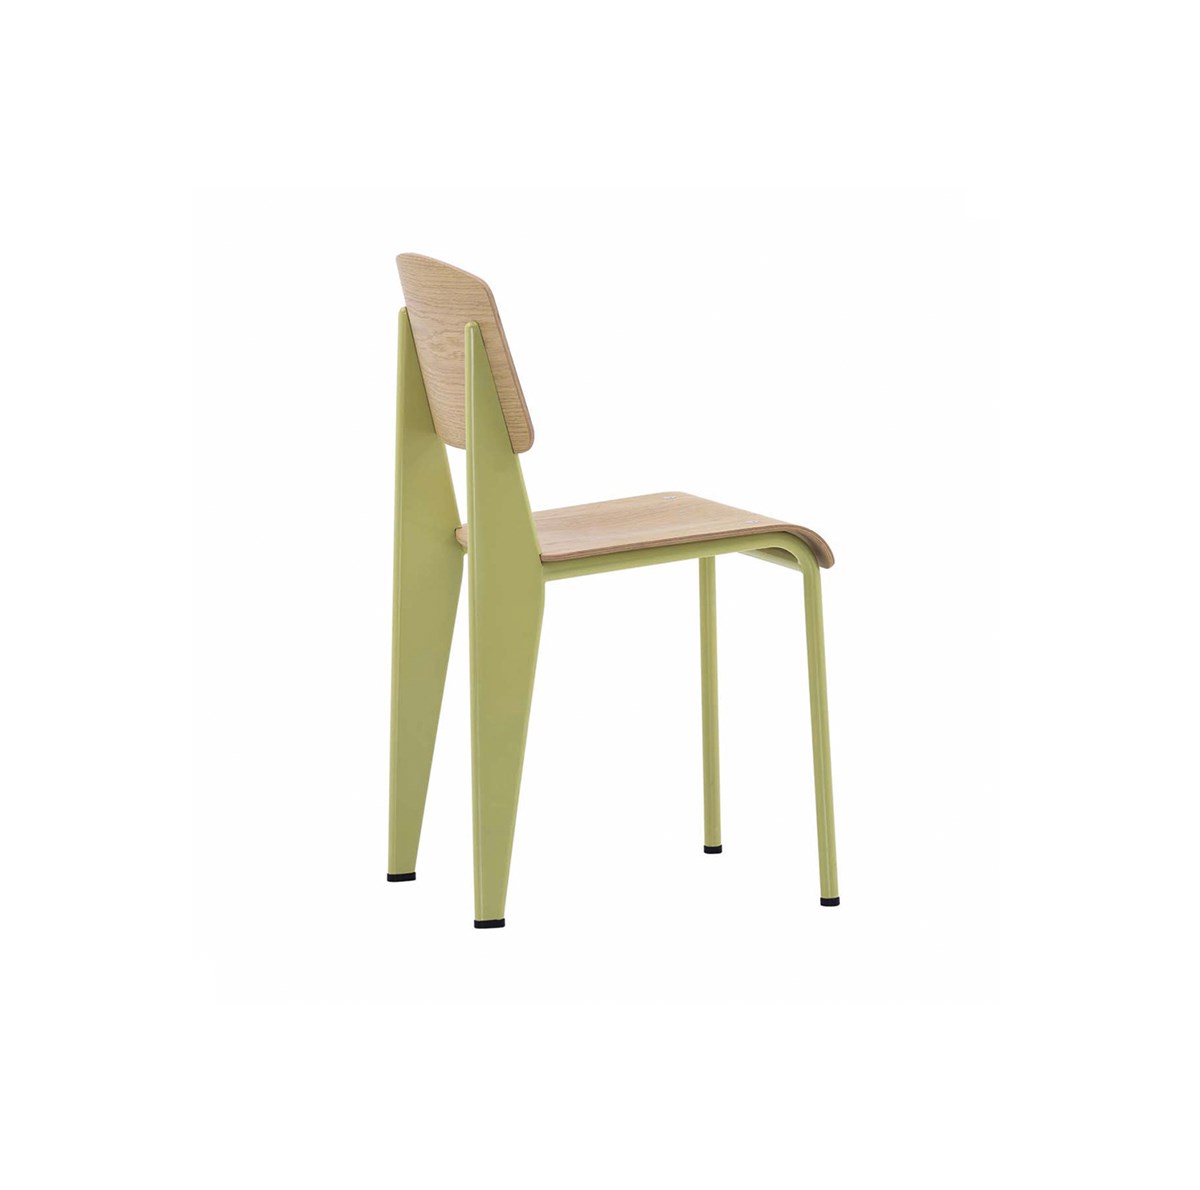 Vitra-Jean-Prouve-Standard-Chair-Matisse-2